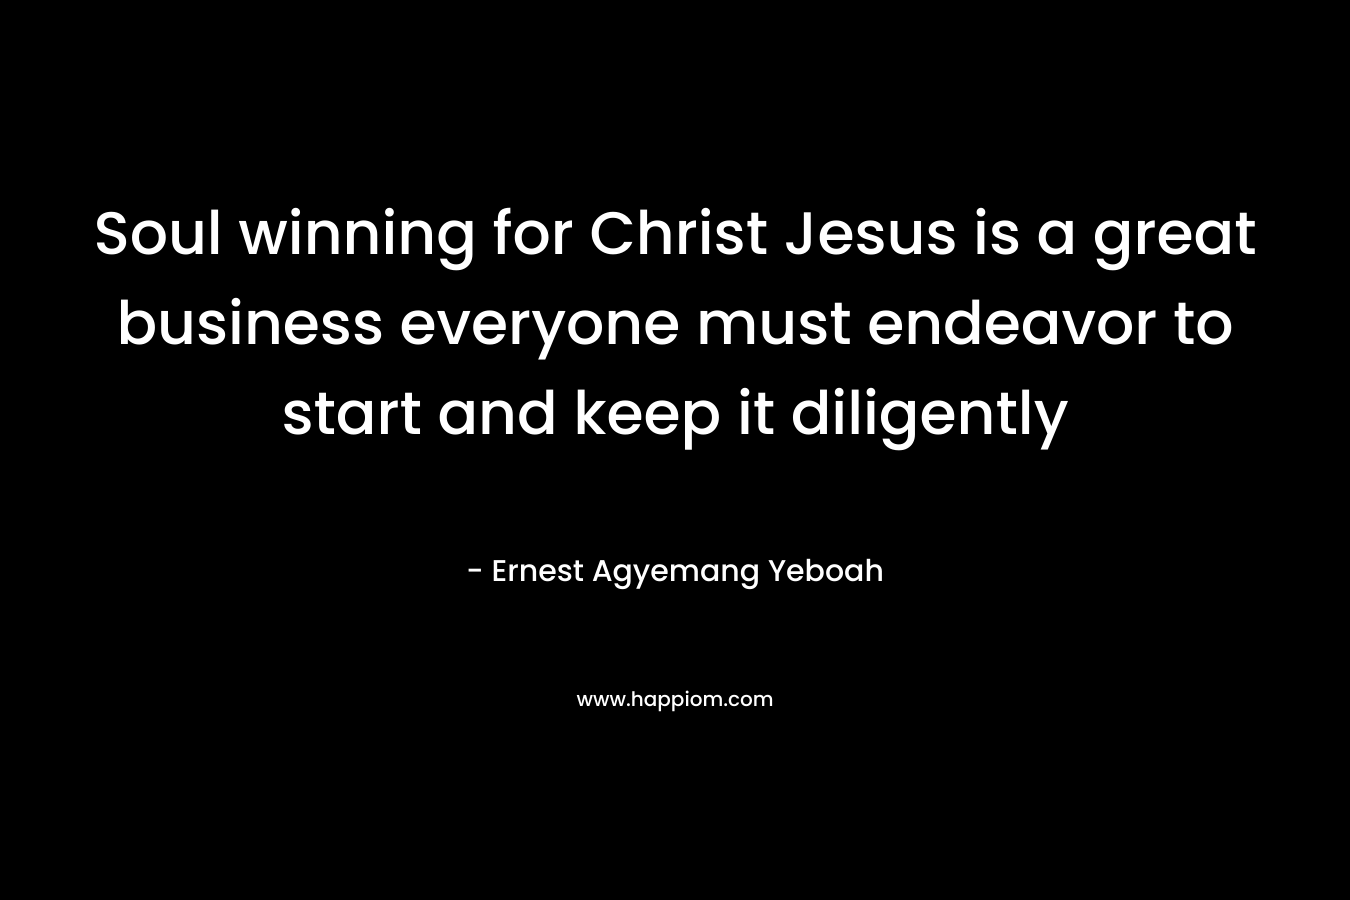 Soul winning for Christ Jesus is a great business everyone must endeavor to start and keep it diligently